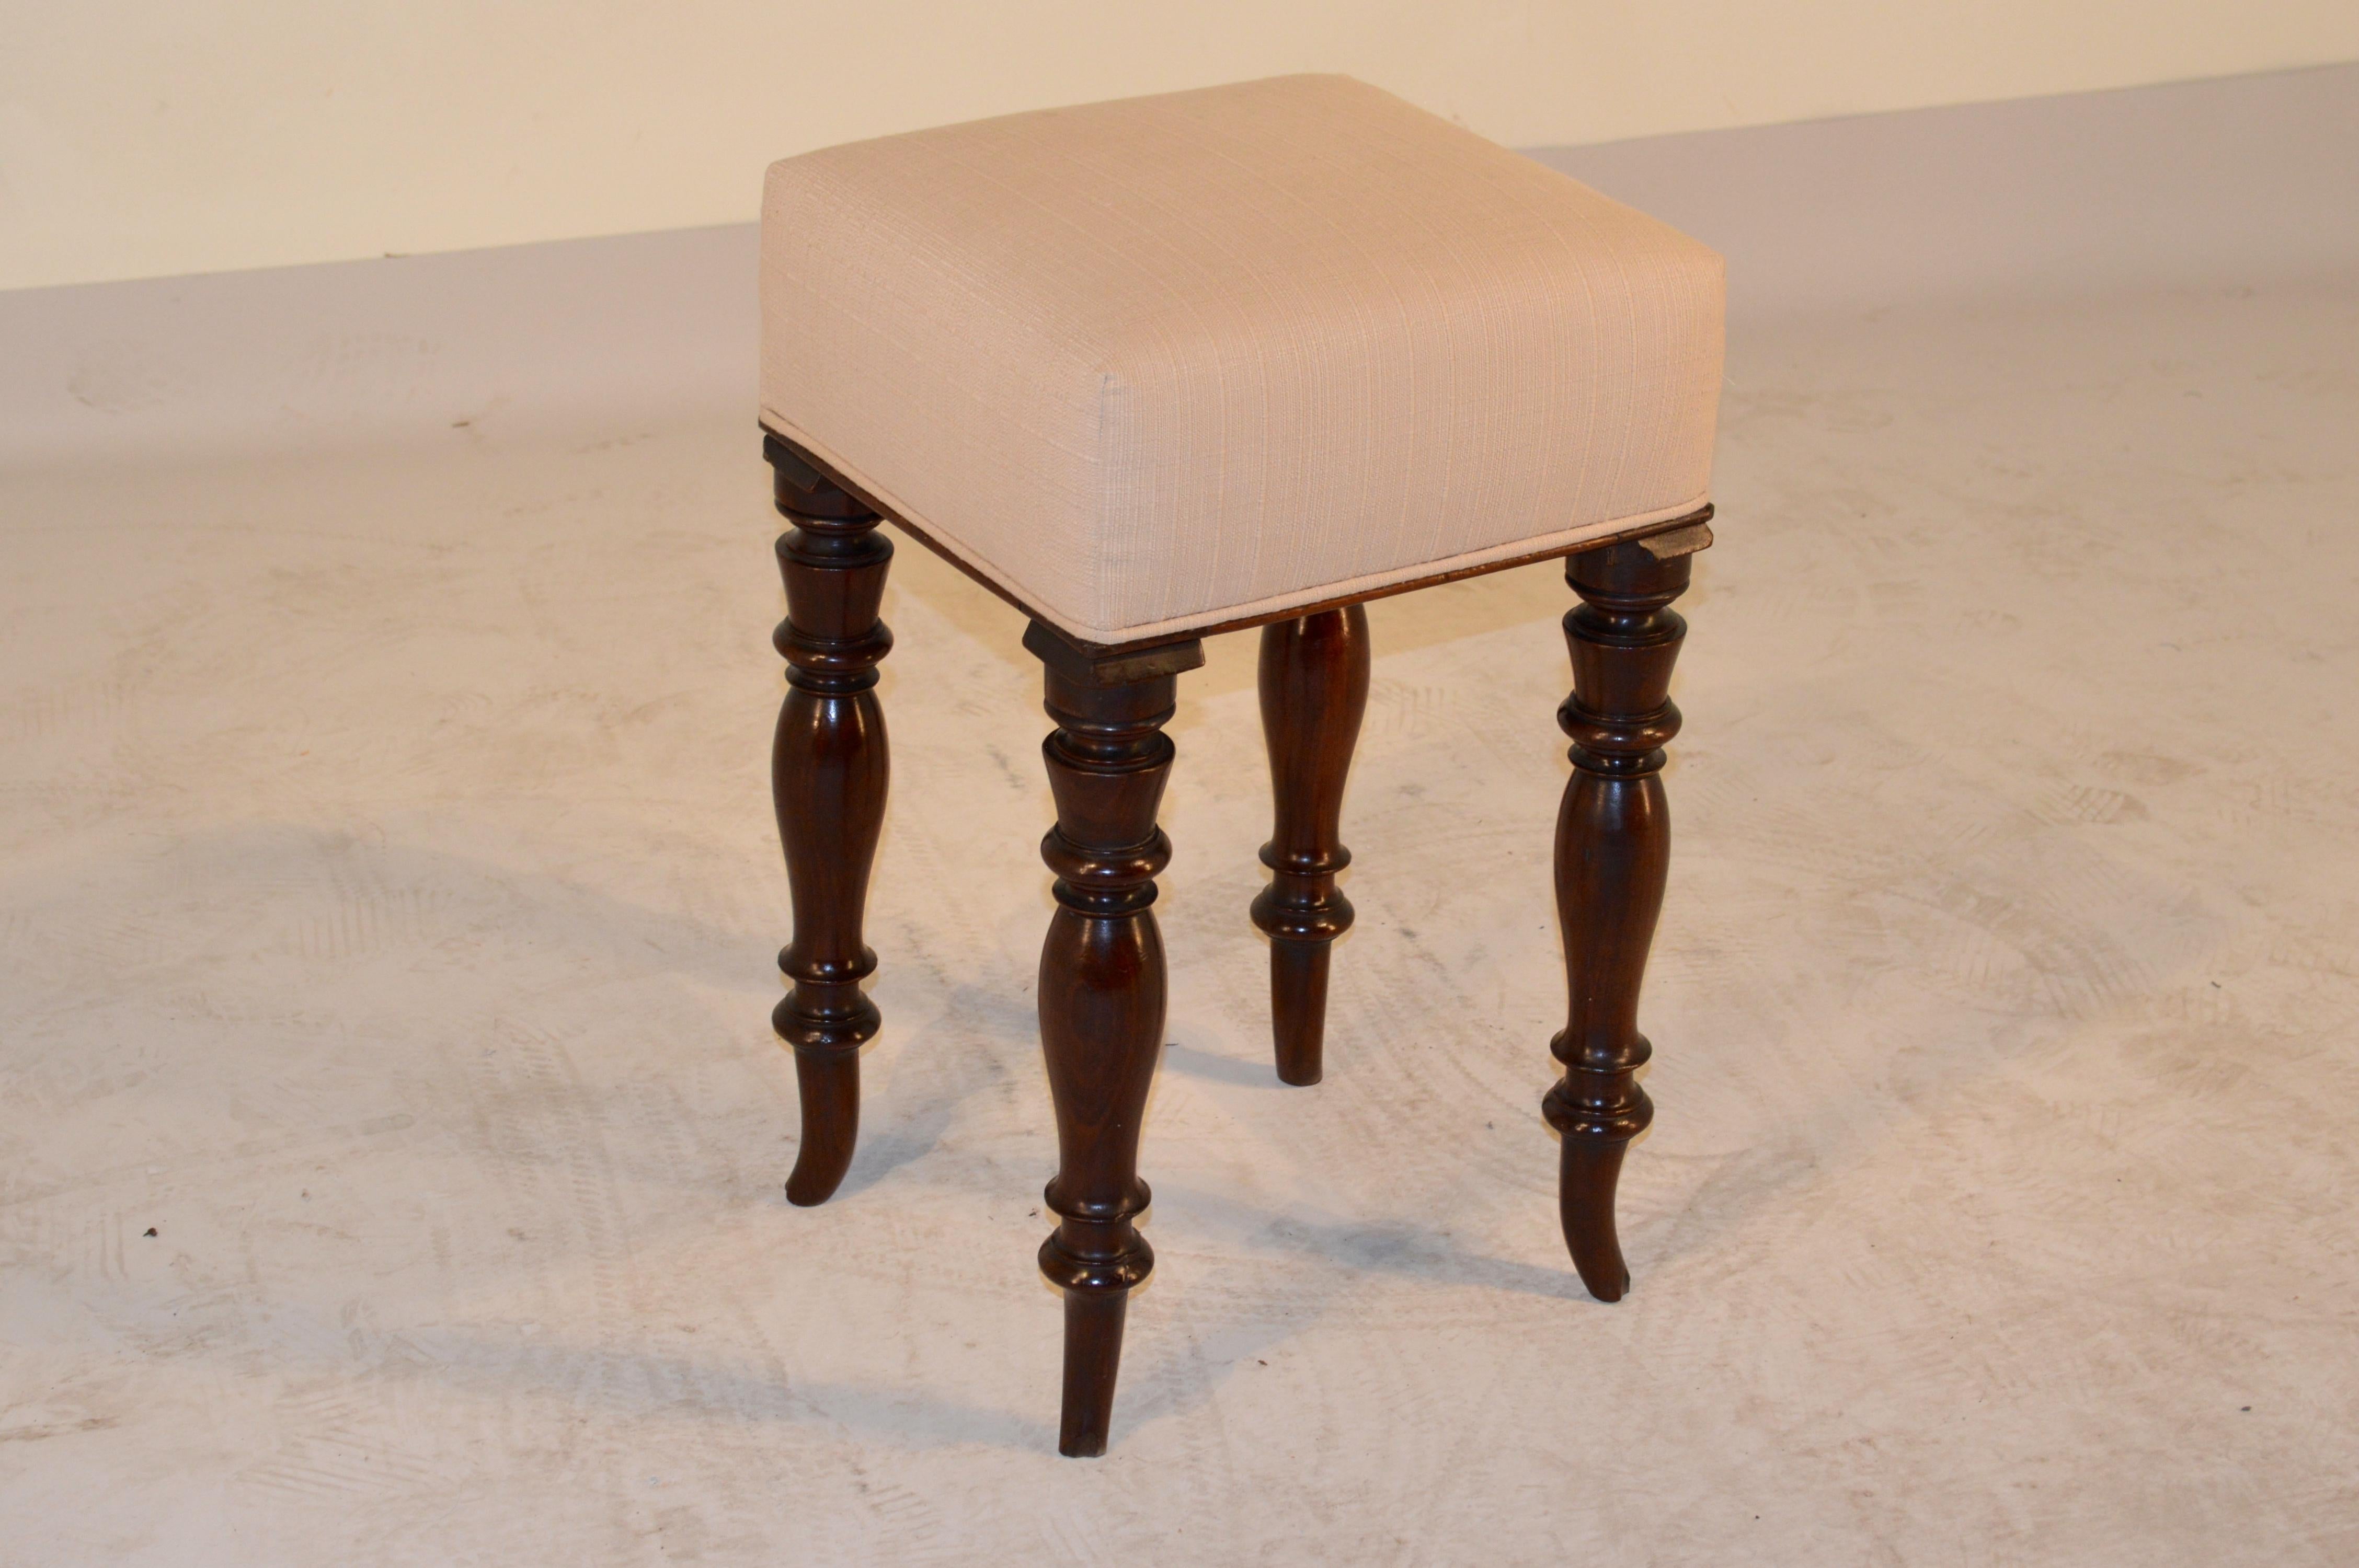 19th century English stool made from mahogany and newly upholstered in linen. Hand-turned legs with nicely splayed feet. Losses to tips of feet and moldings.
 